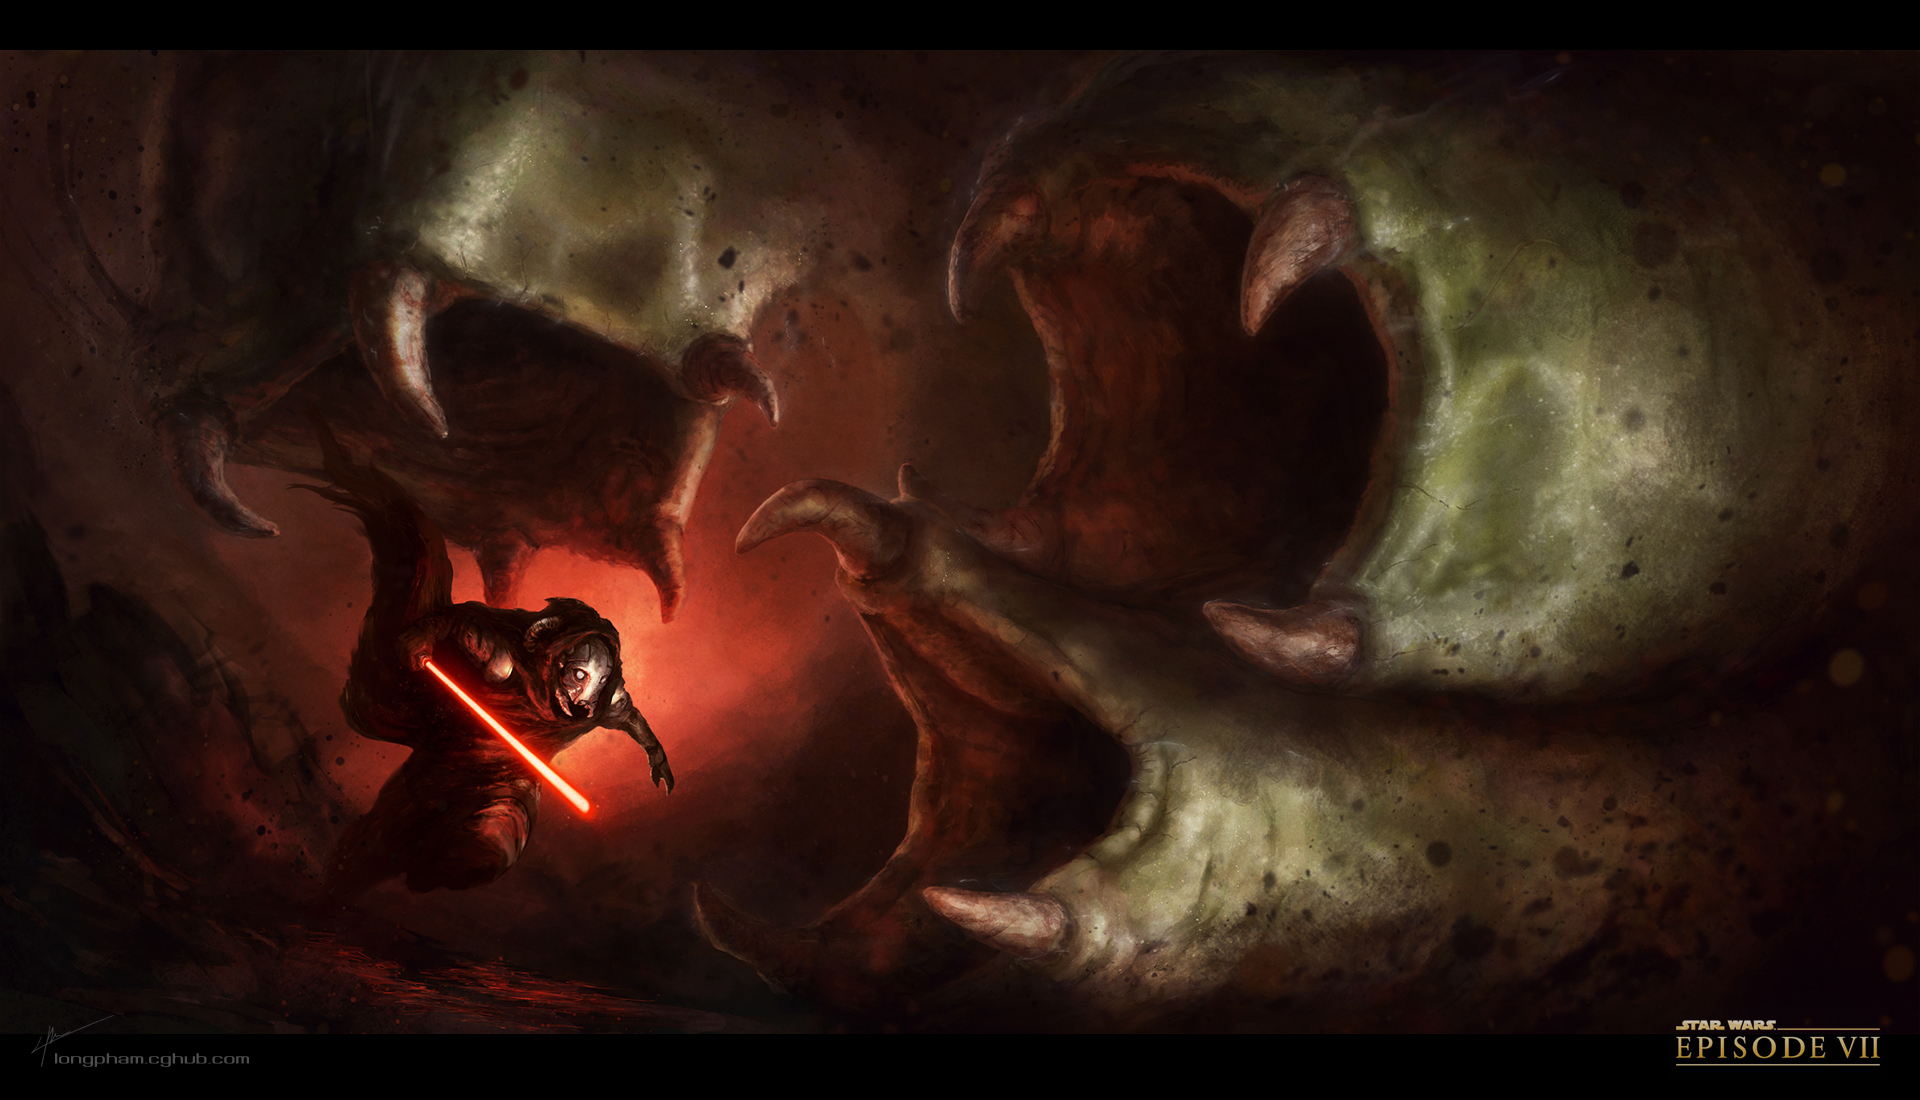 Sith lord escape by Long Pham on